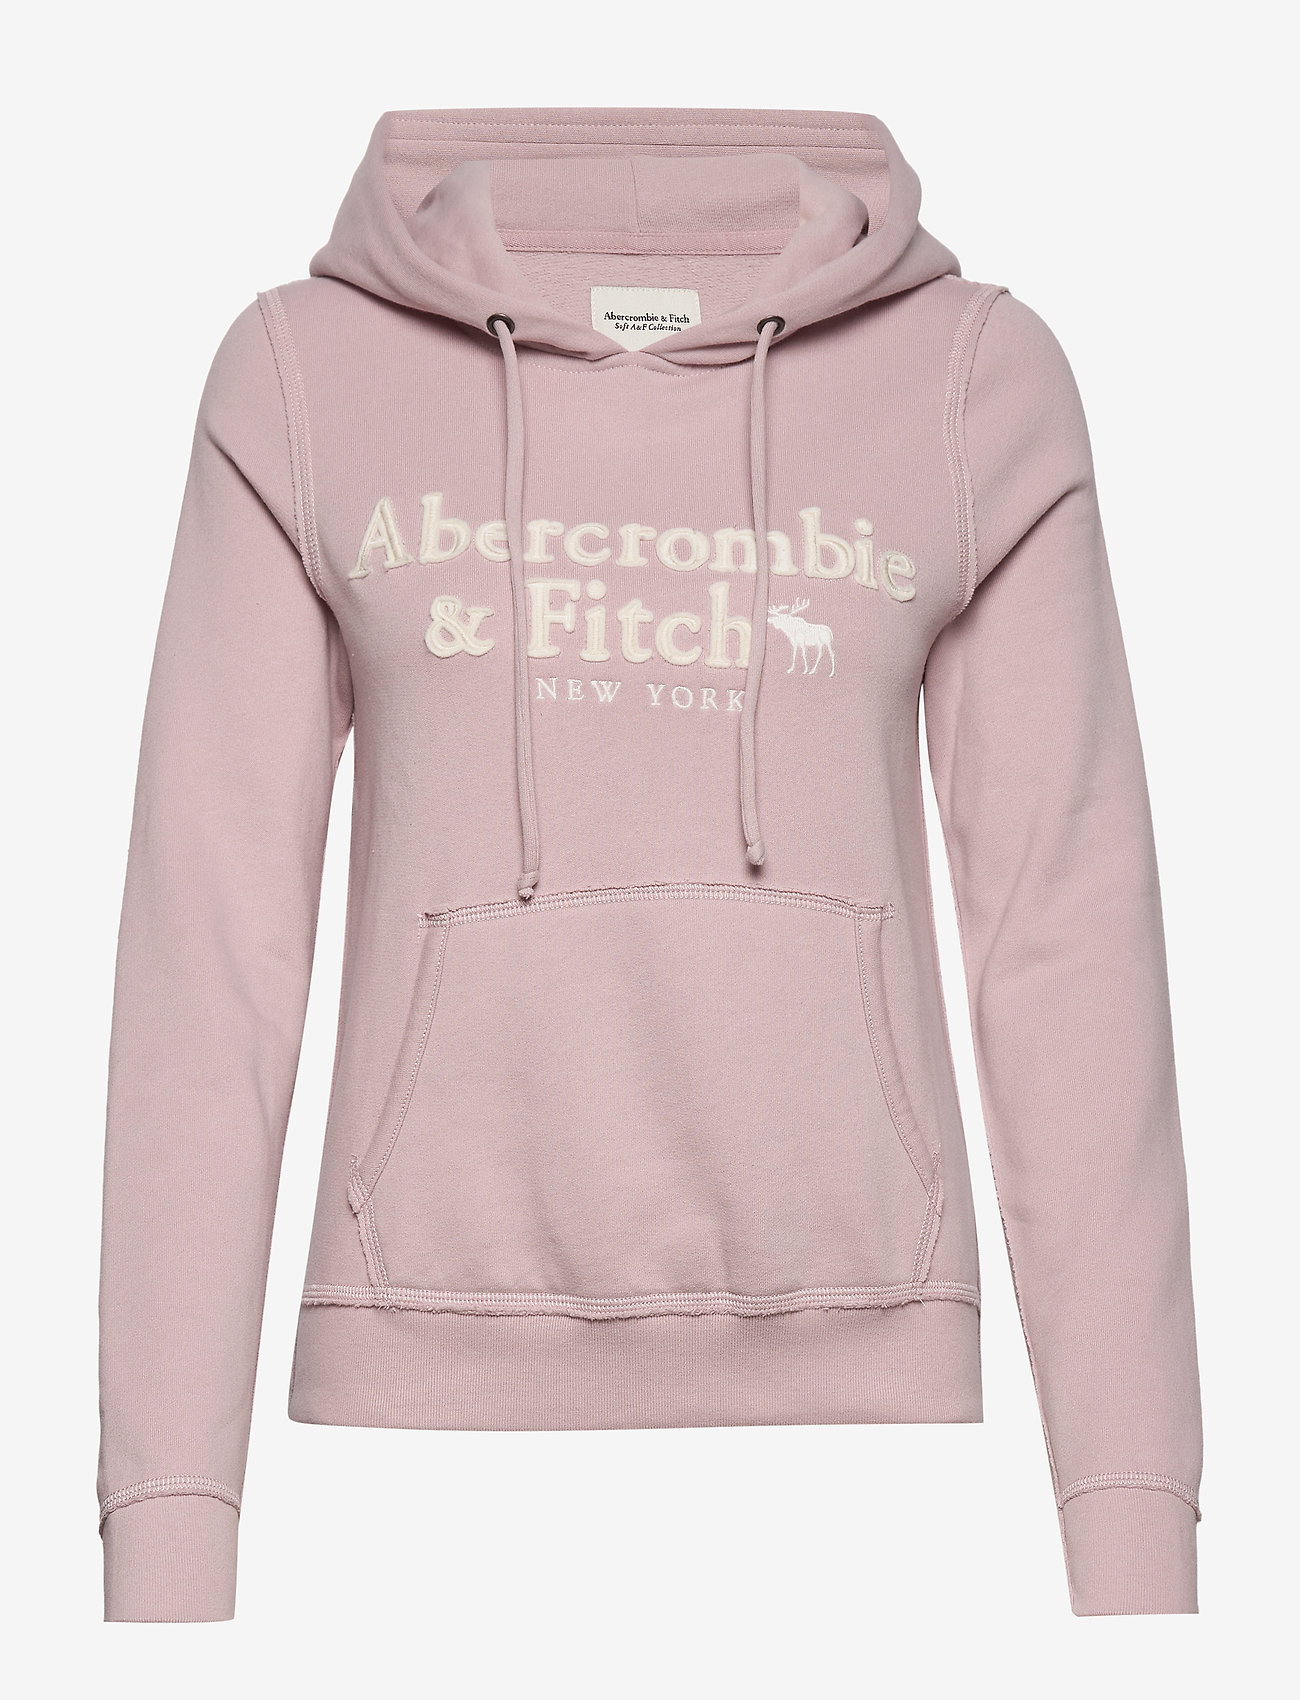 abercrombie & fitch hoodies